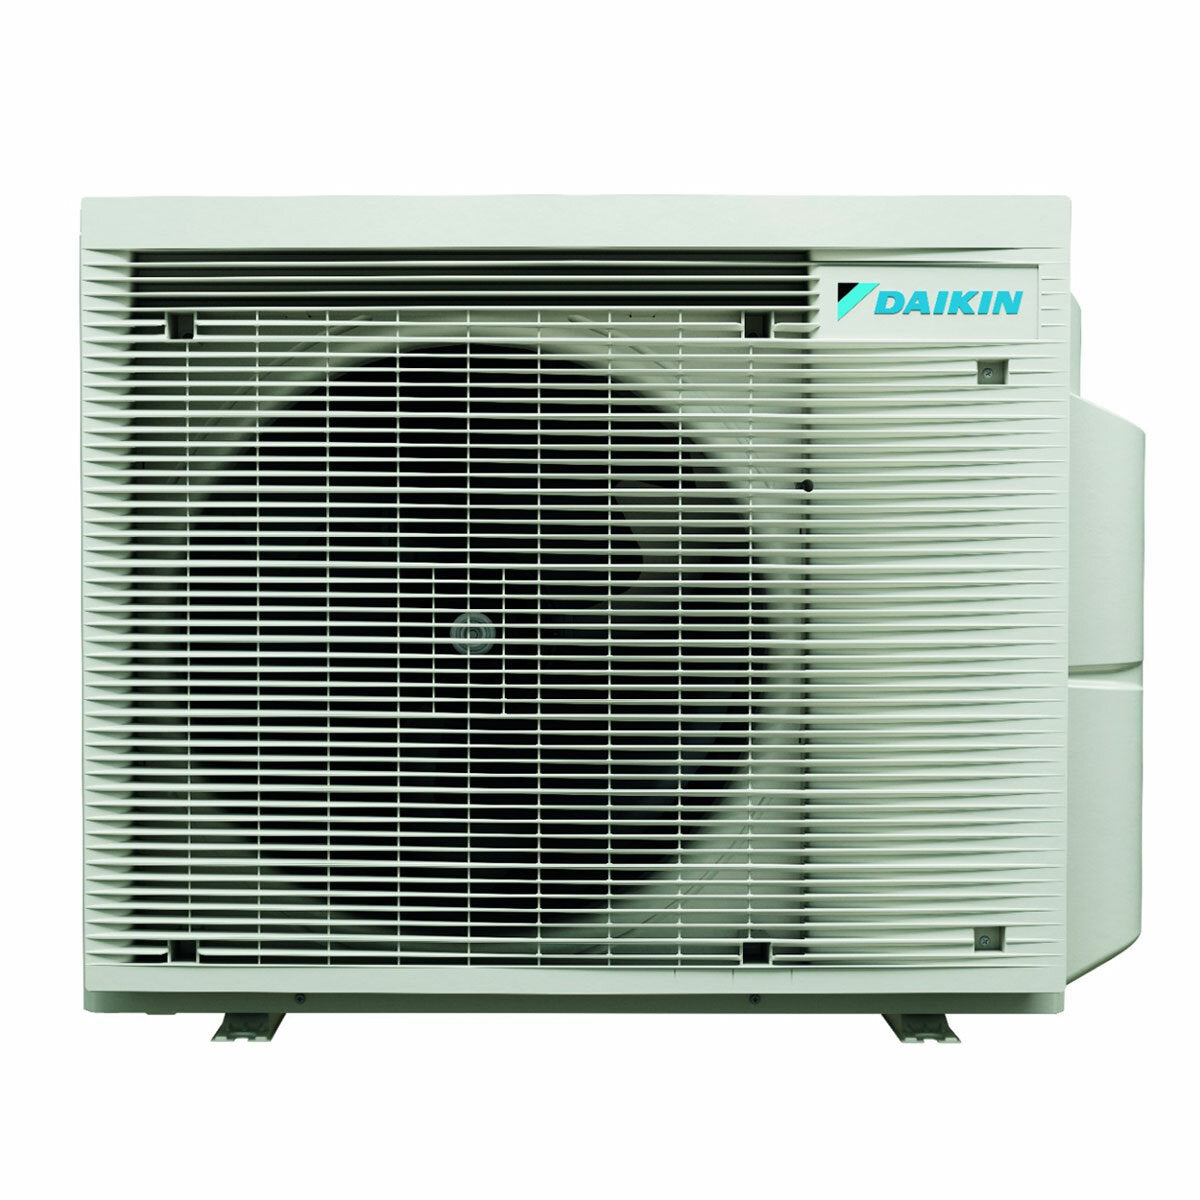 Daikin Multi+ trial split air conditioning system and domestic hot water - Indoor units Emura 3 white 9000+9000+12000 BTU - Tank 120 l